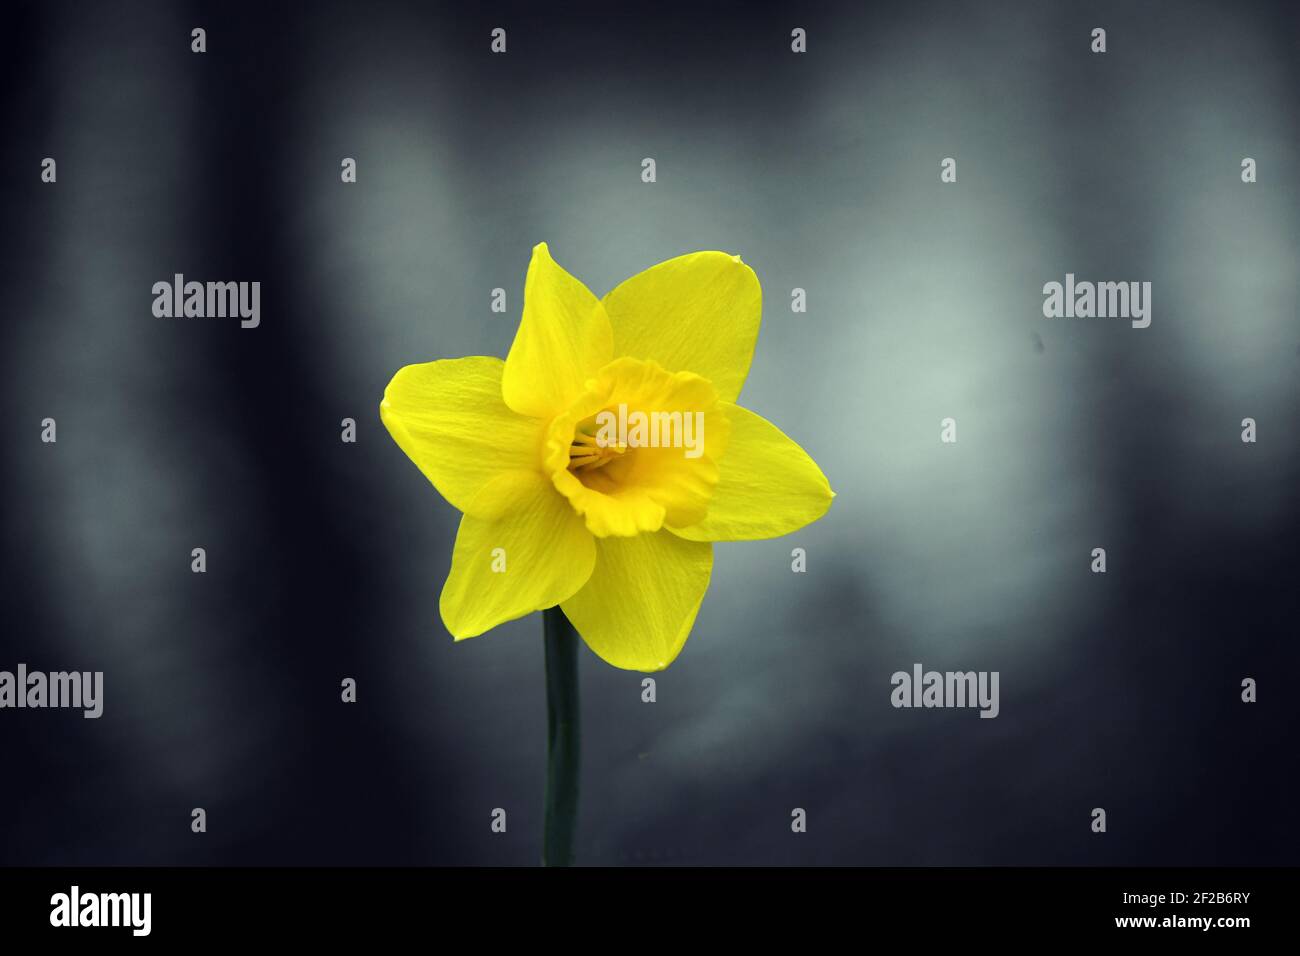 Wales 06 December 2020 Daffodils which are the National Emblem Flower of Wales       Picture By Richard Williams Cardiff Freelance Photographer Stock Photo